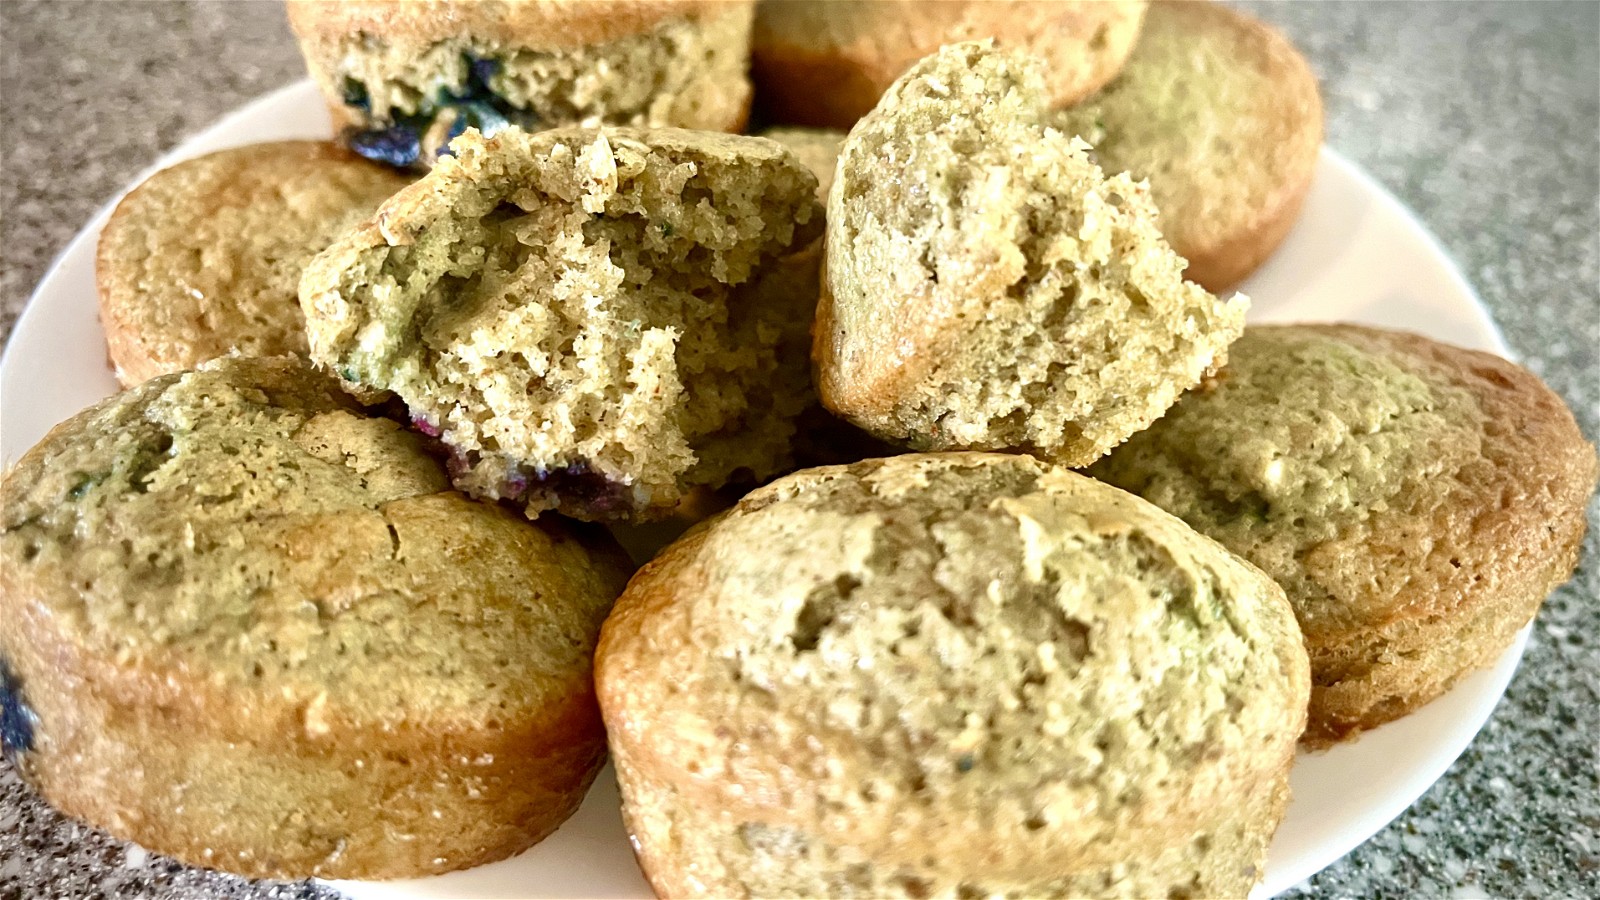 Image of Almond and Blueberry Muffins